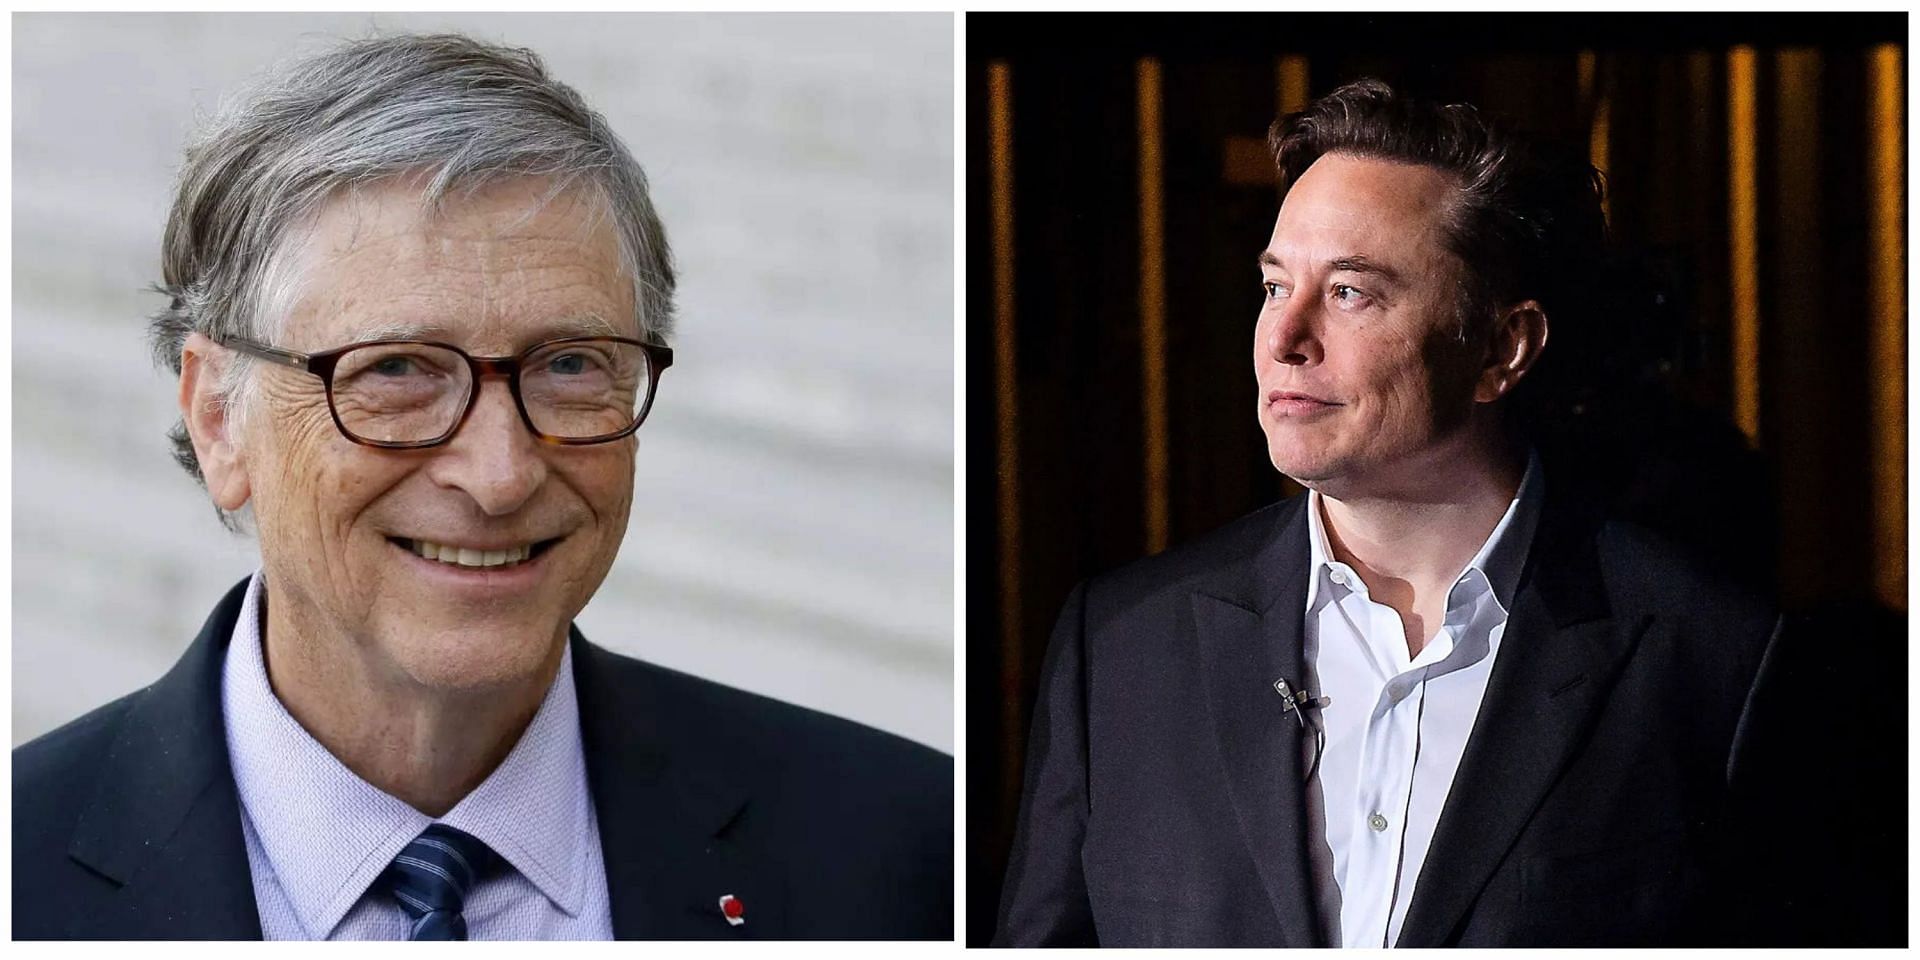 Fake news debunked as article published on a website claimed Elon Musk suggested that Bill Gates should be put in prison. (Image via Instagram)